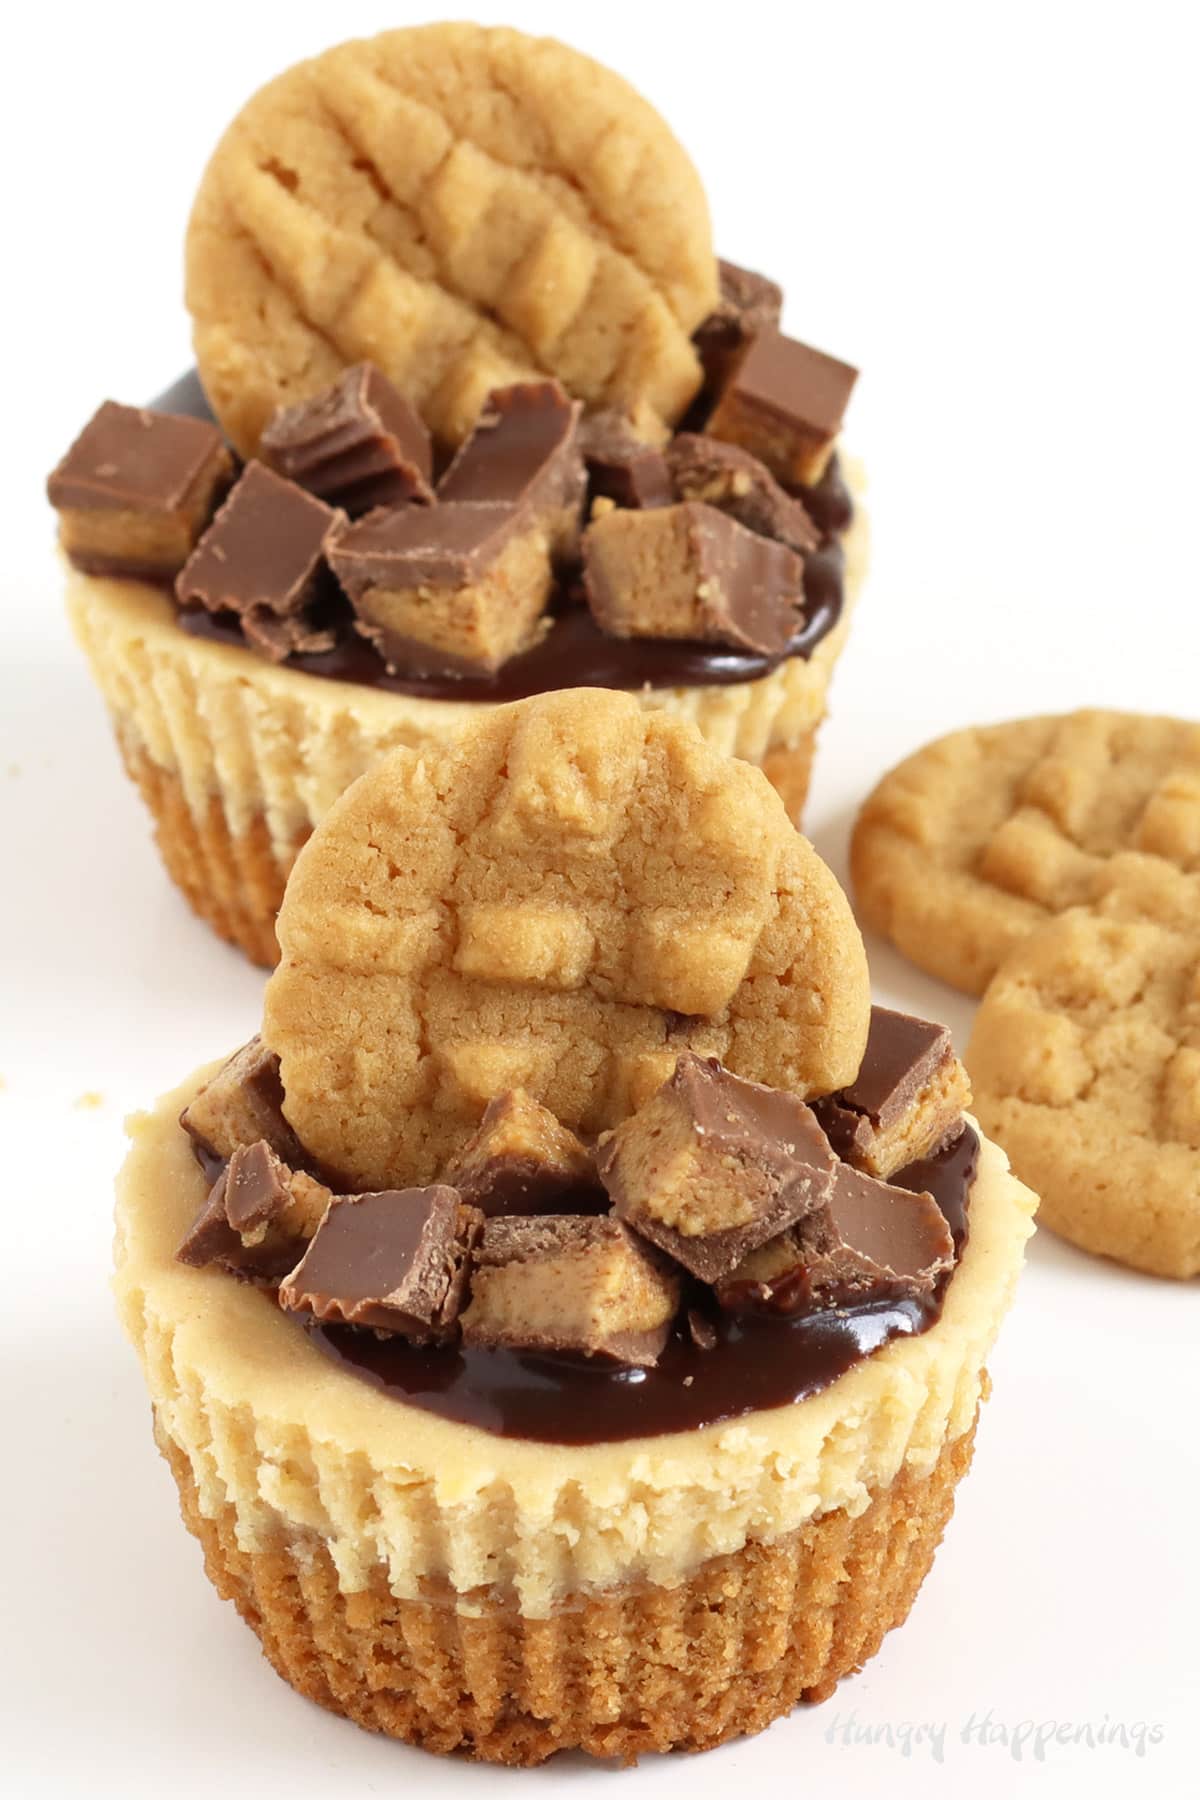 Mini Reese's Peanut Butter Cup Cheesecakes topped with chocolate ganache and mini peanut butter cookies.